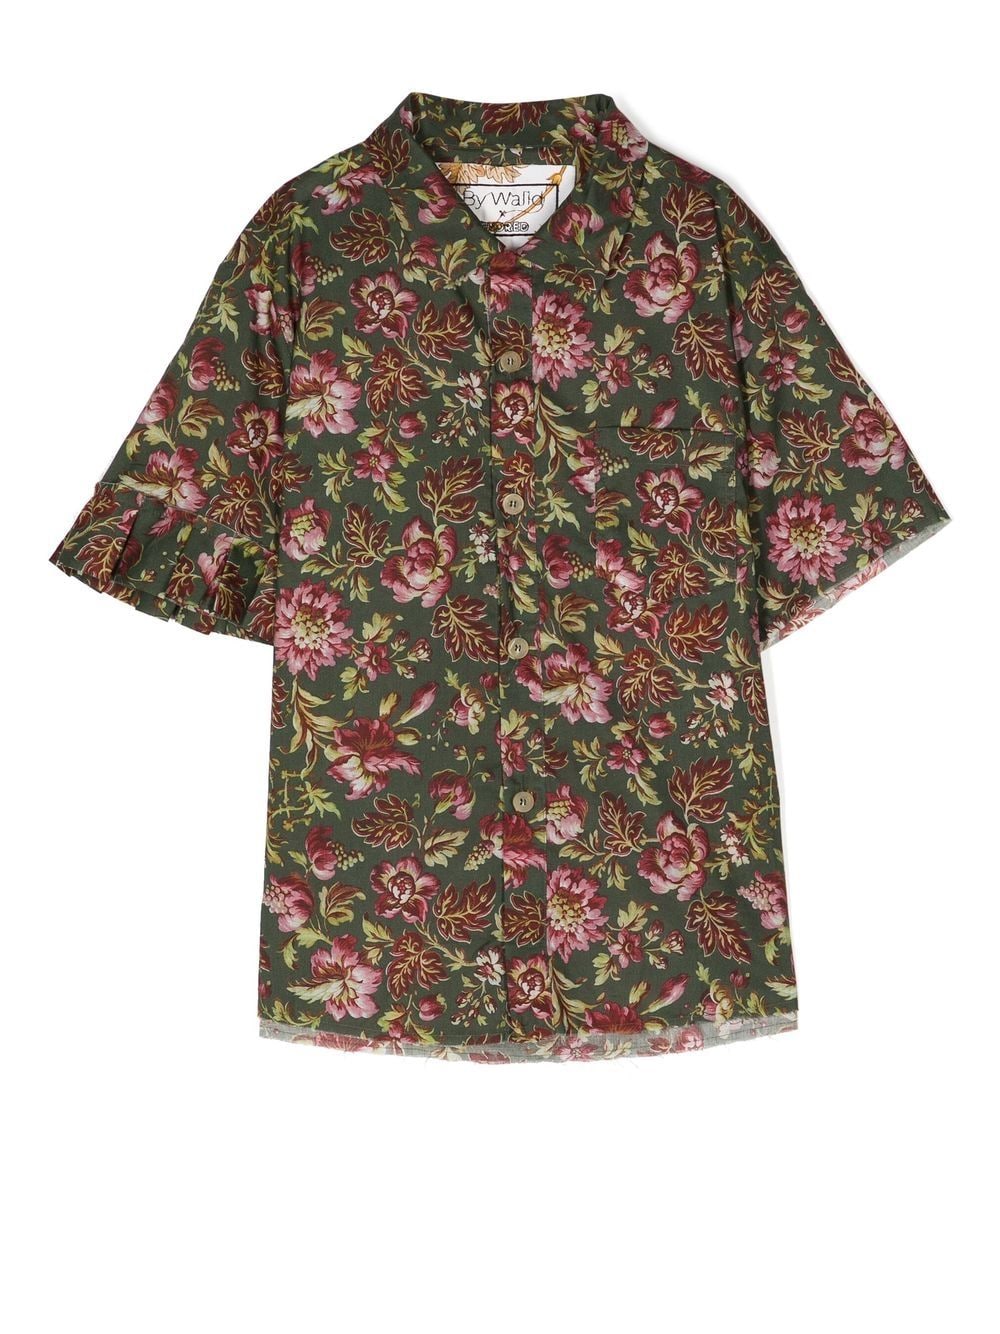 By Walid x Kindred floral-print short-sleeve shirt - Green von By Walid